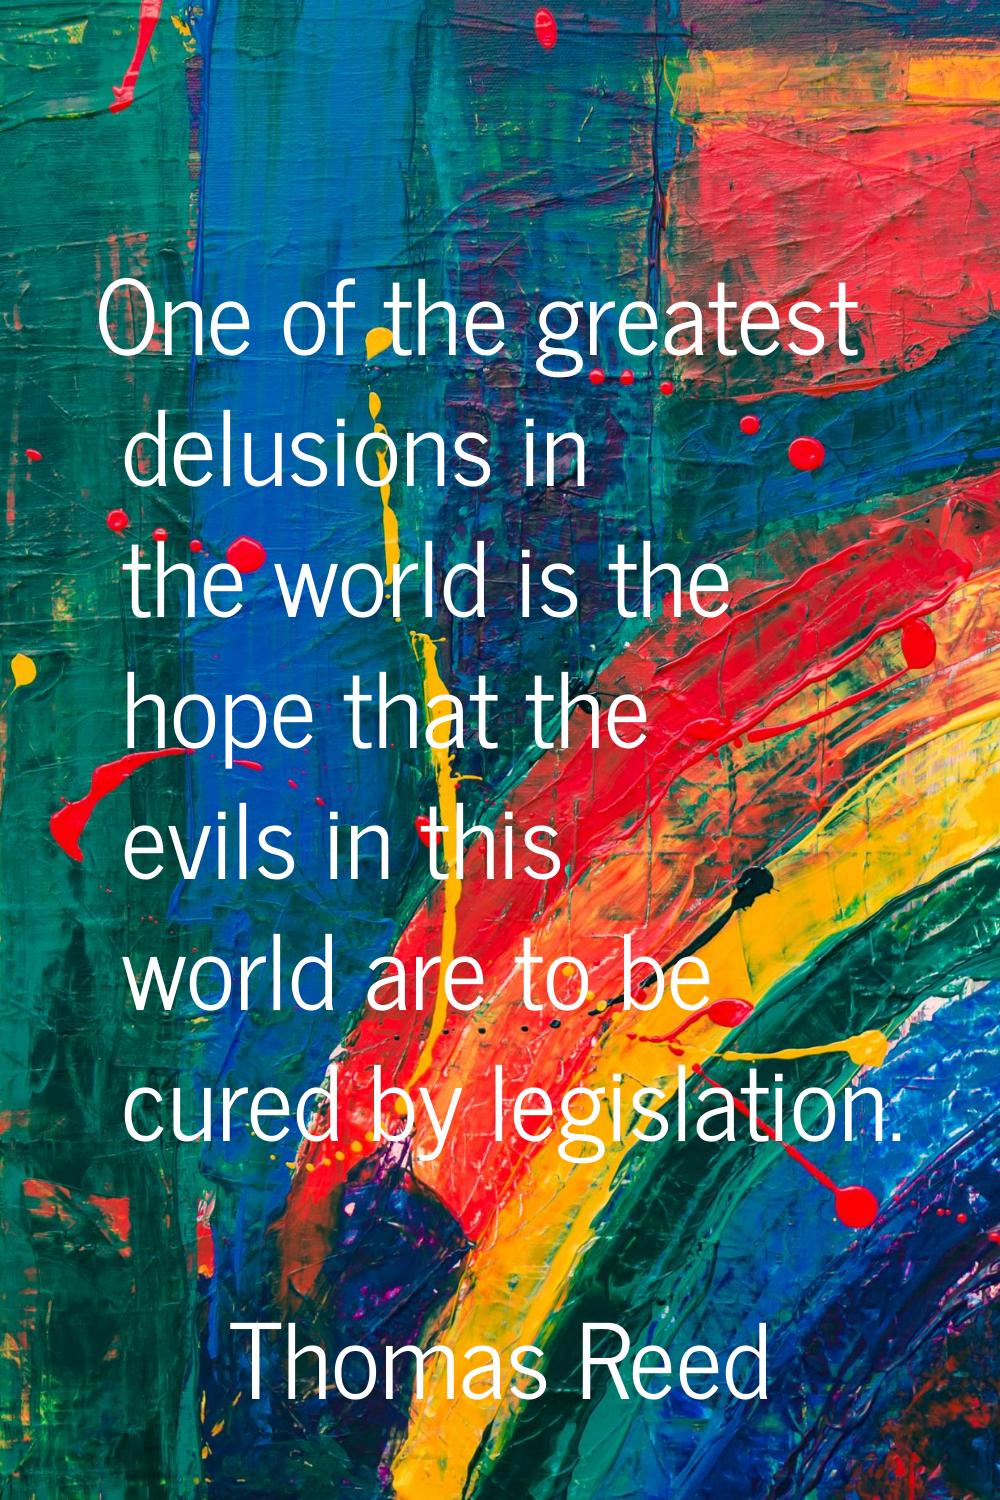 One of the greatest delusions in the world is the hope that the evils in this world are to be cured